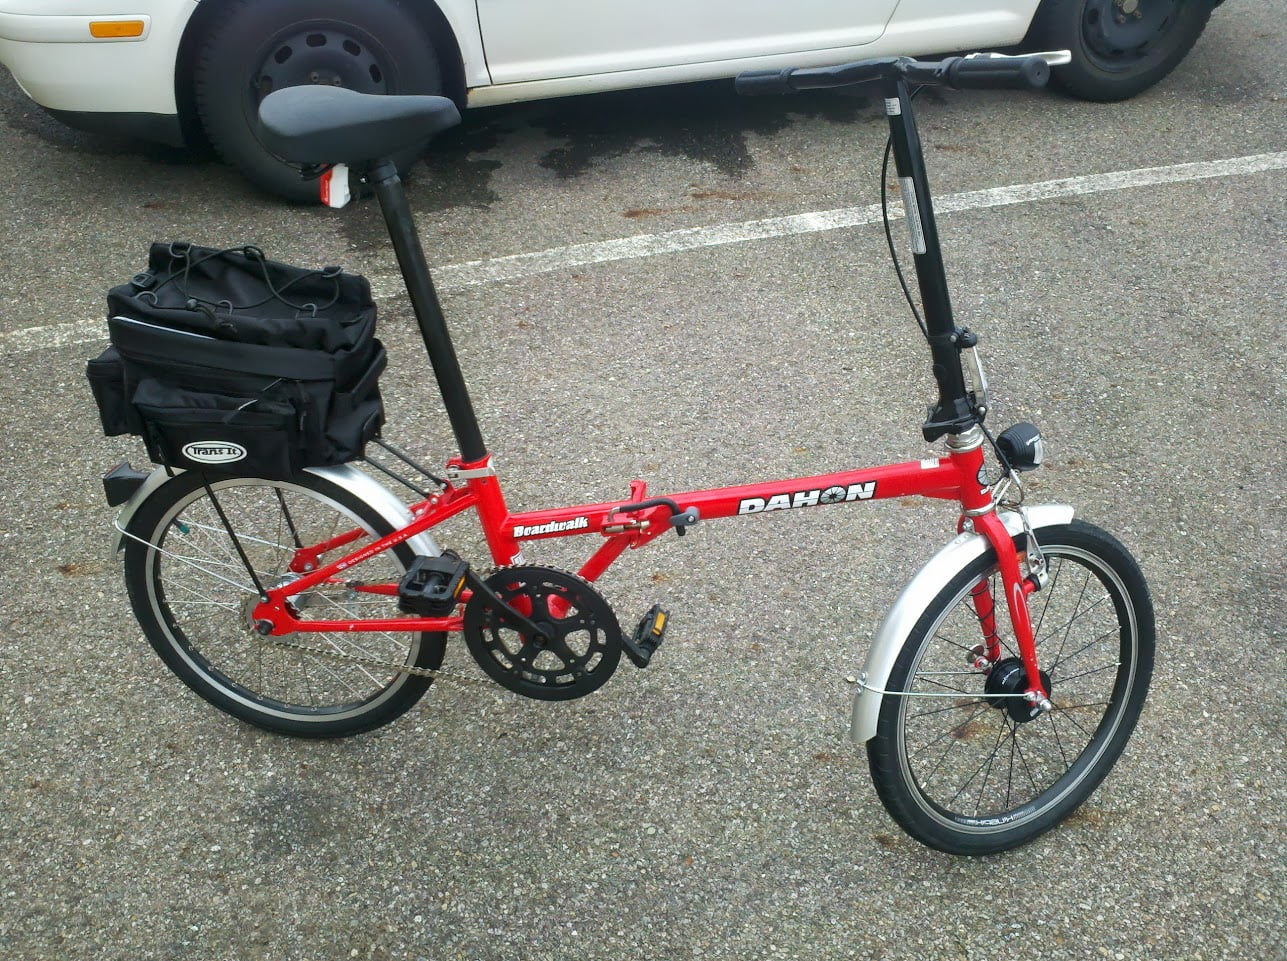 Folding bicycle. Wheels are small like on a kid's bicycle, but a full grown man can comfortably sit on this one. Seating position is upright, for slow urban riding.